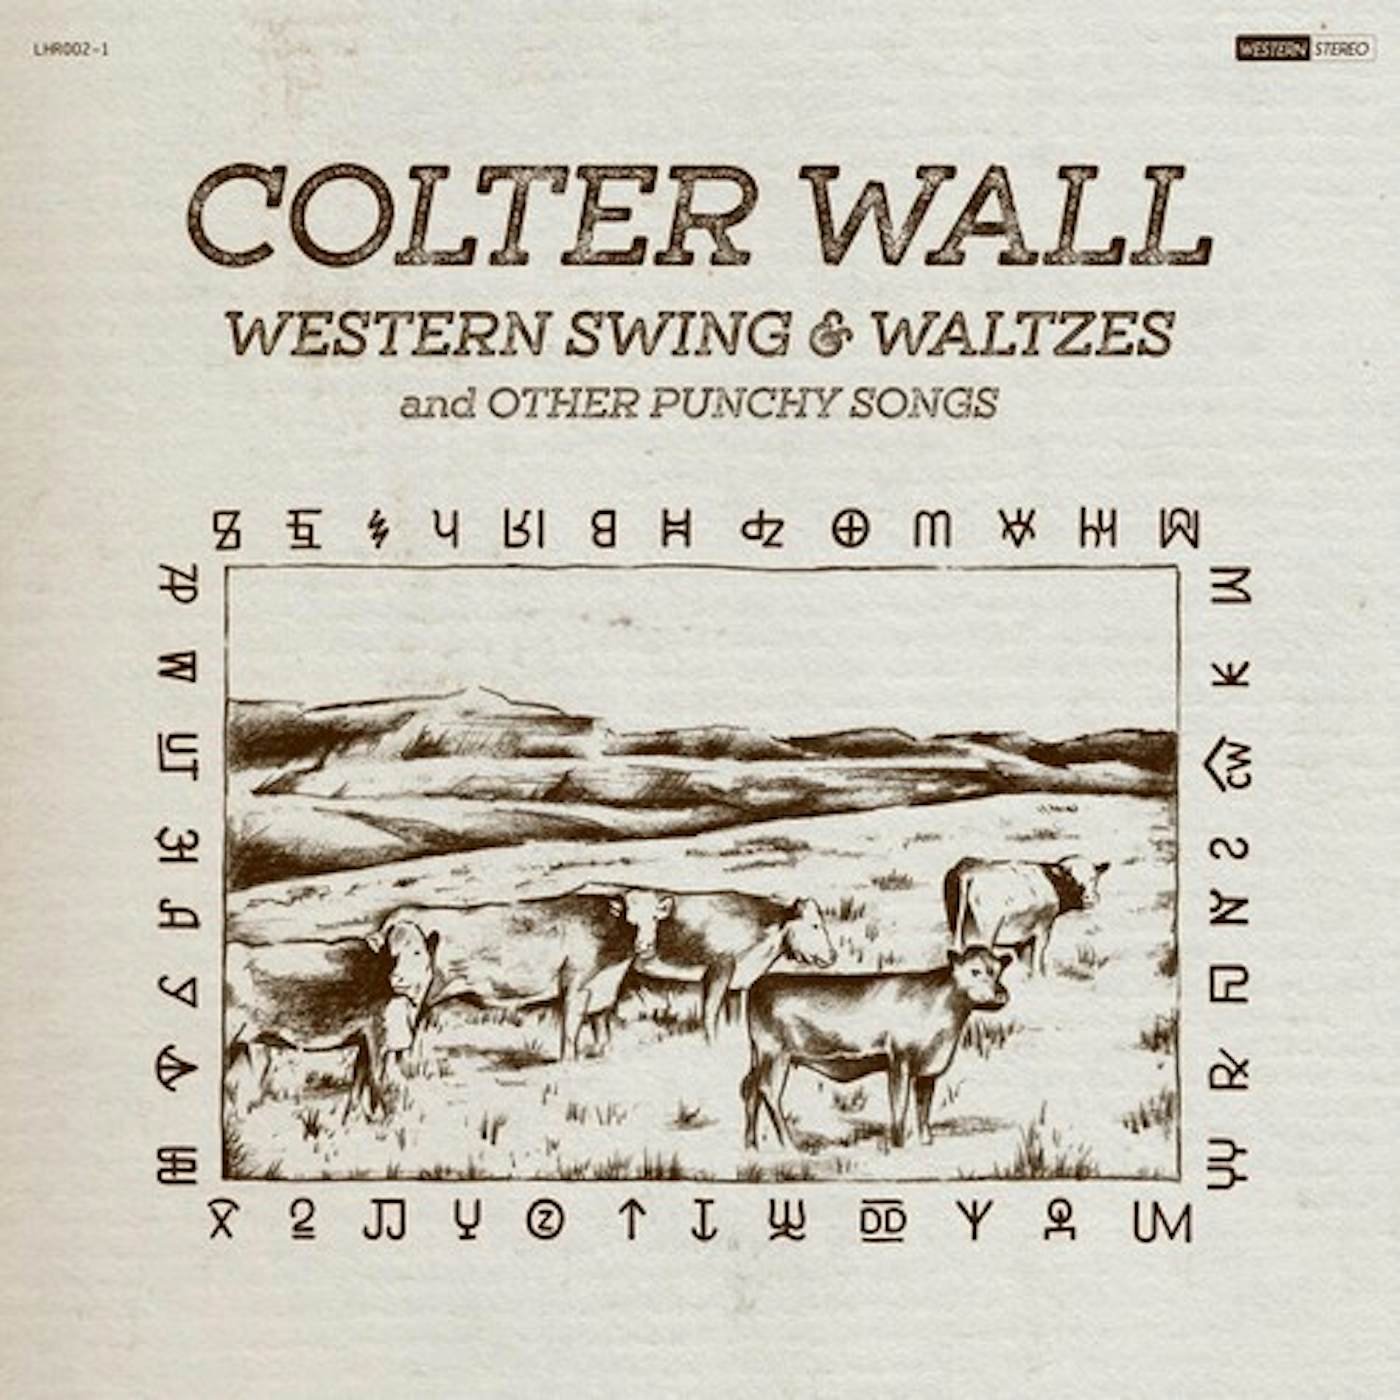 Colter Wall Western Swing & Waltzes and Other Punchy Songs Vinyl Record